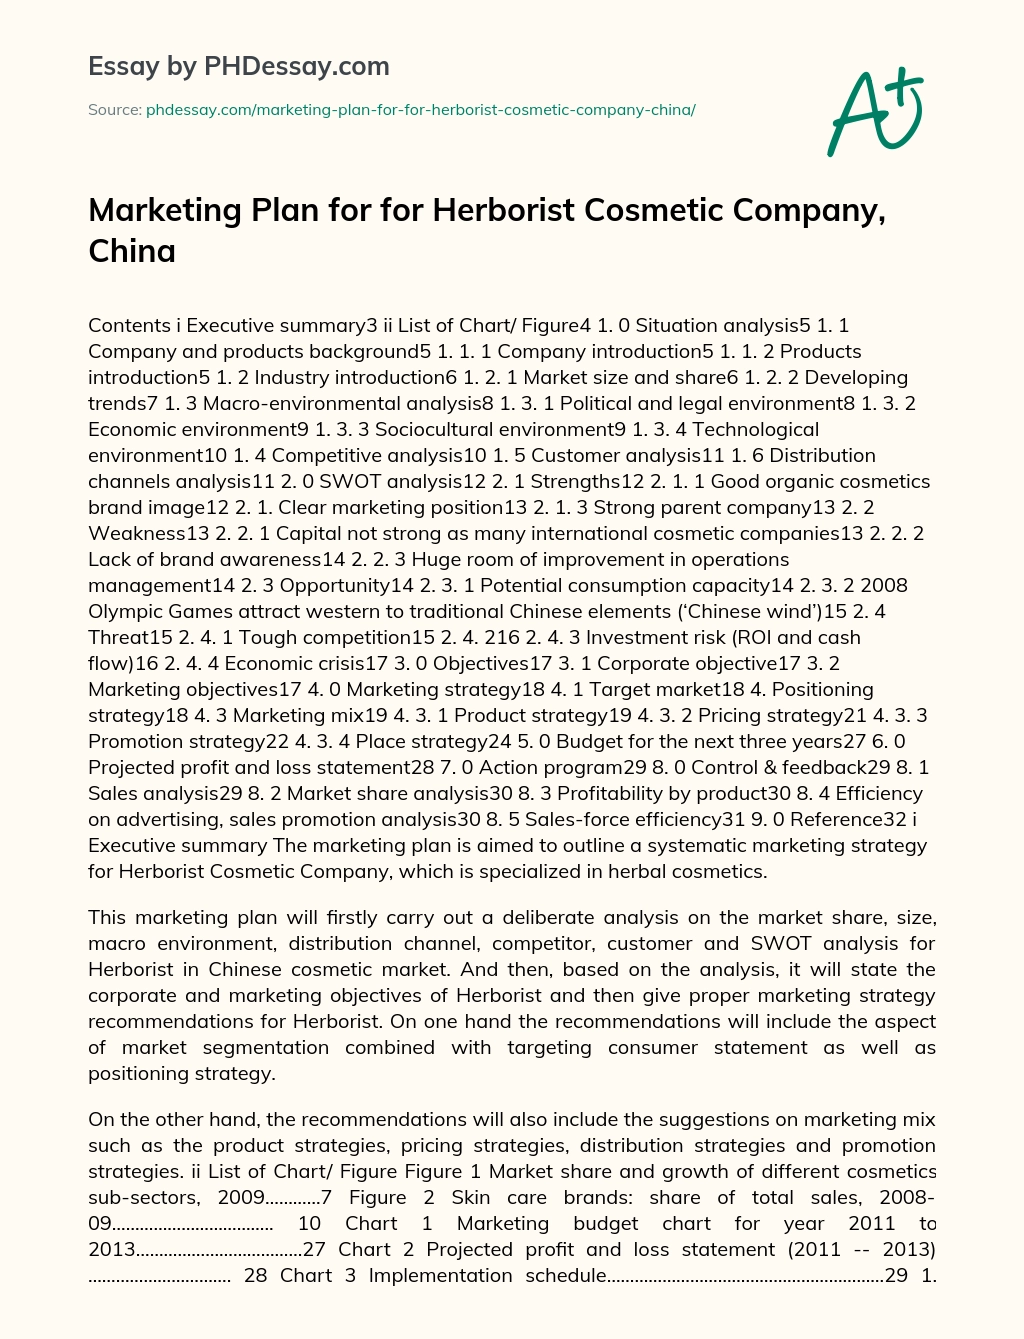 Marketing Plan for for Herborist Cosmetic Company, China essay